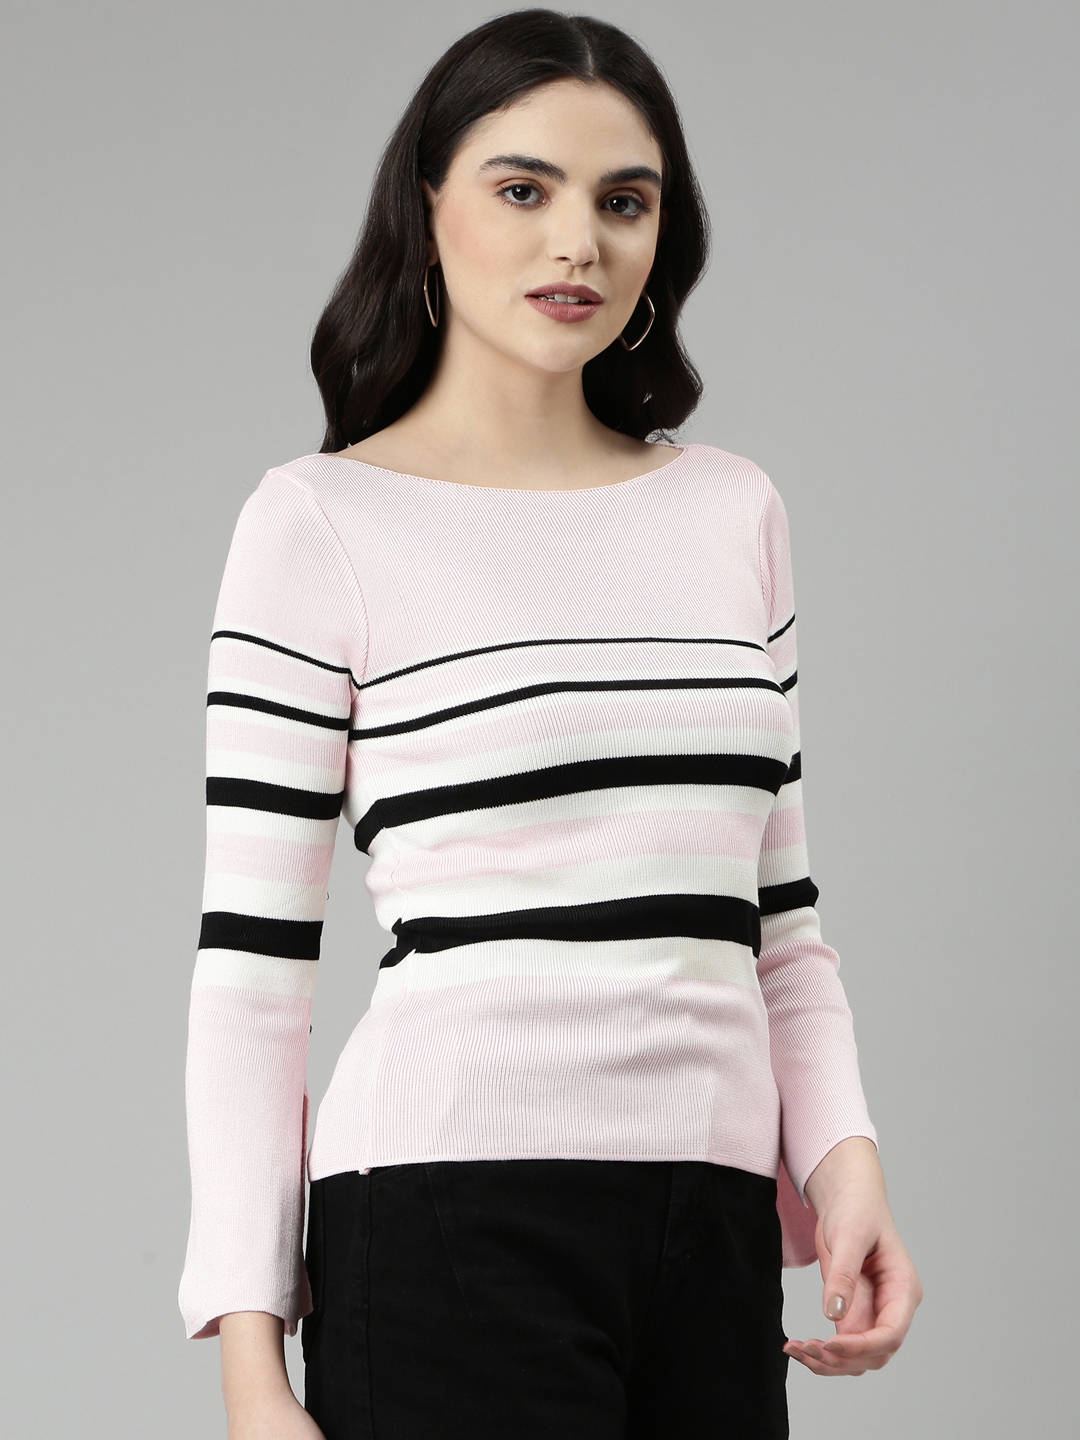 Showoff | SHOWOFF Women's Boat Neck Striped Bell Sleeves Fitted Pink Top 3